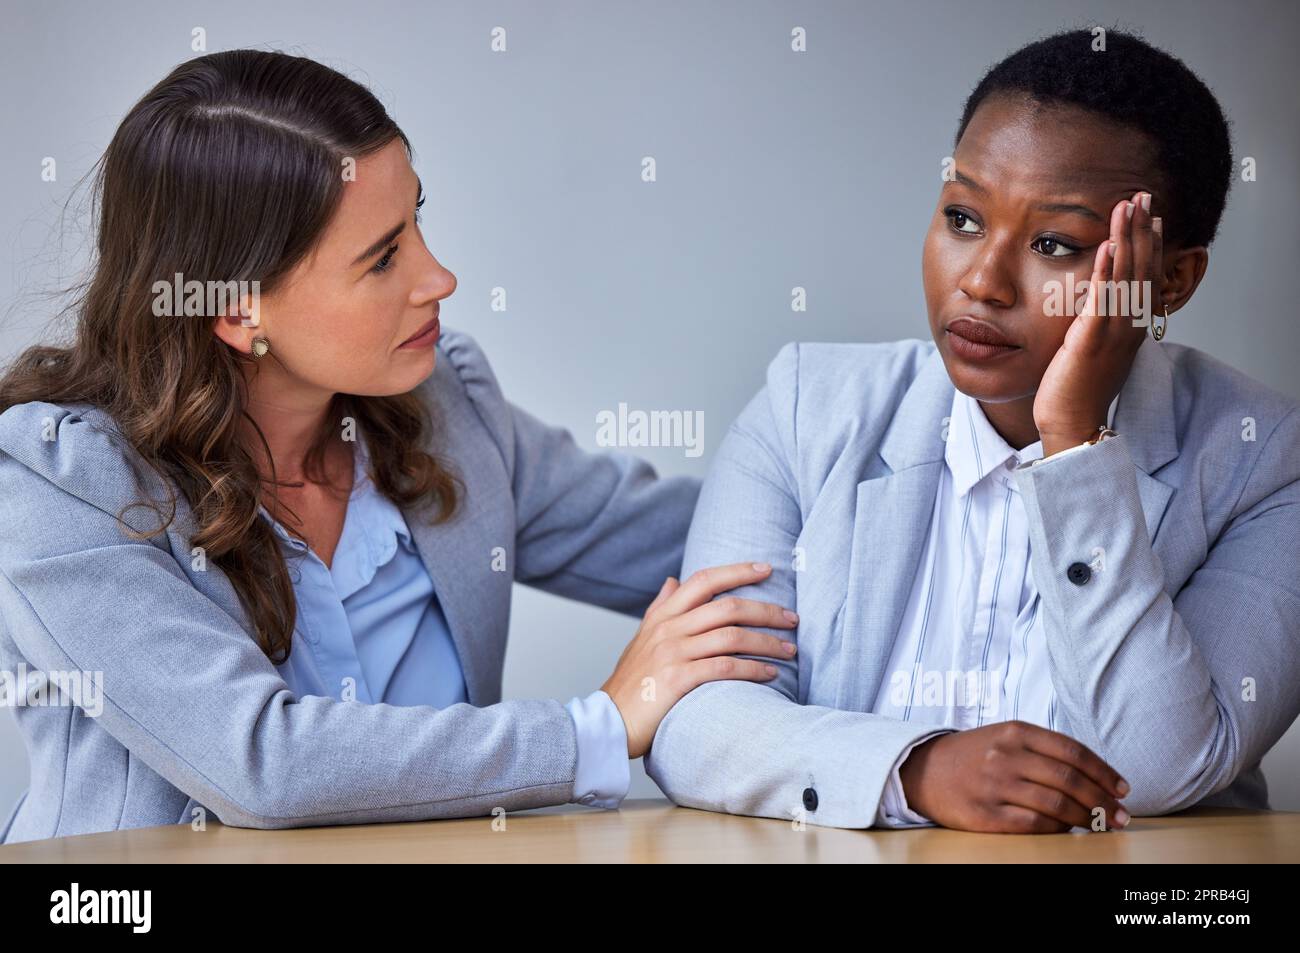 Resilience is accepting your new reality. a young woman comforting her colleague at work. Stock Photo